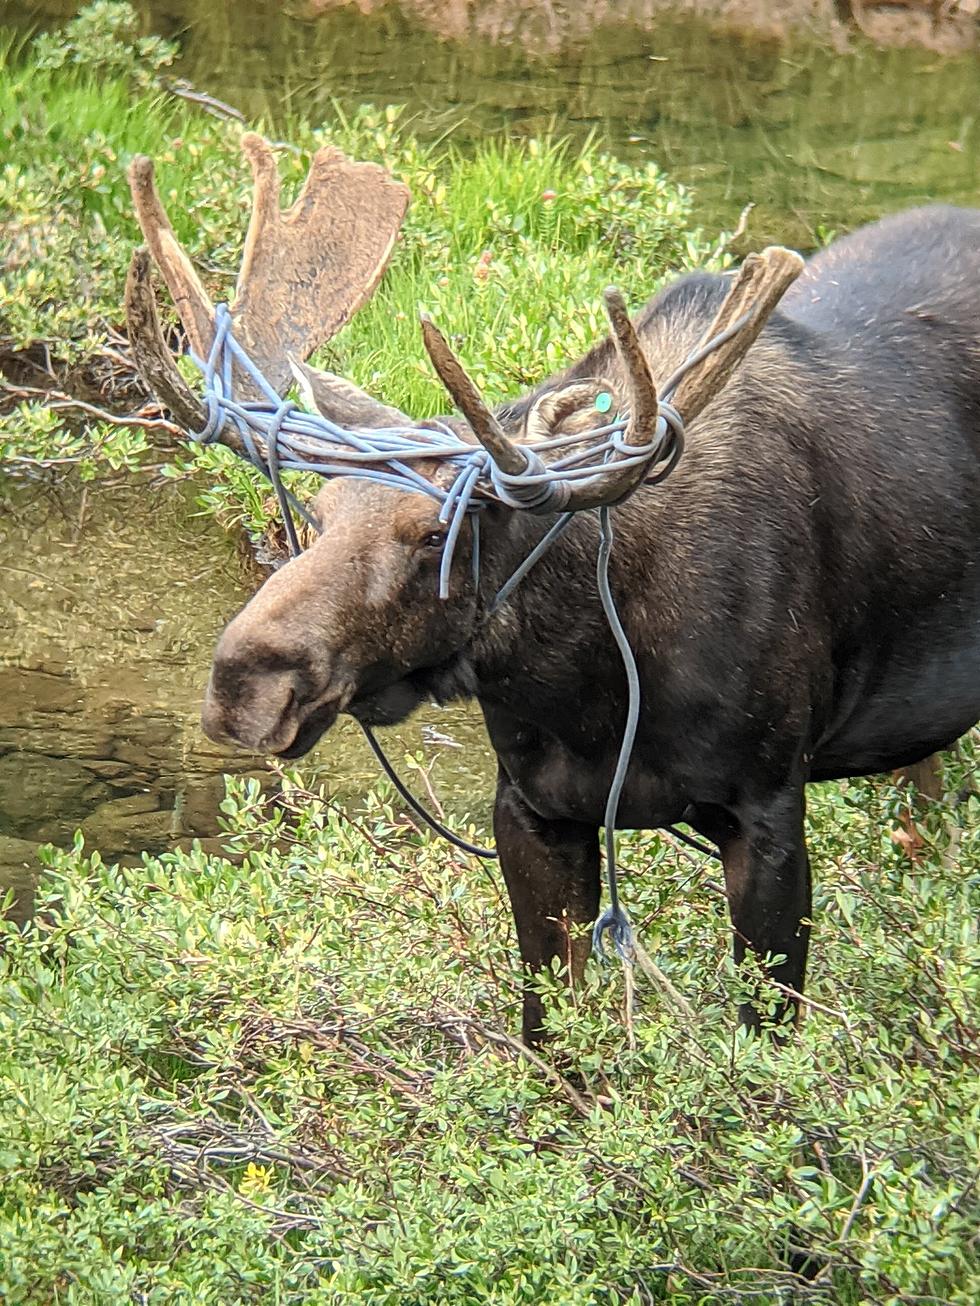 Colorado Parks and Wildlife Helps to Free Moose Tangled in Rope